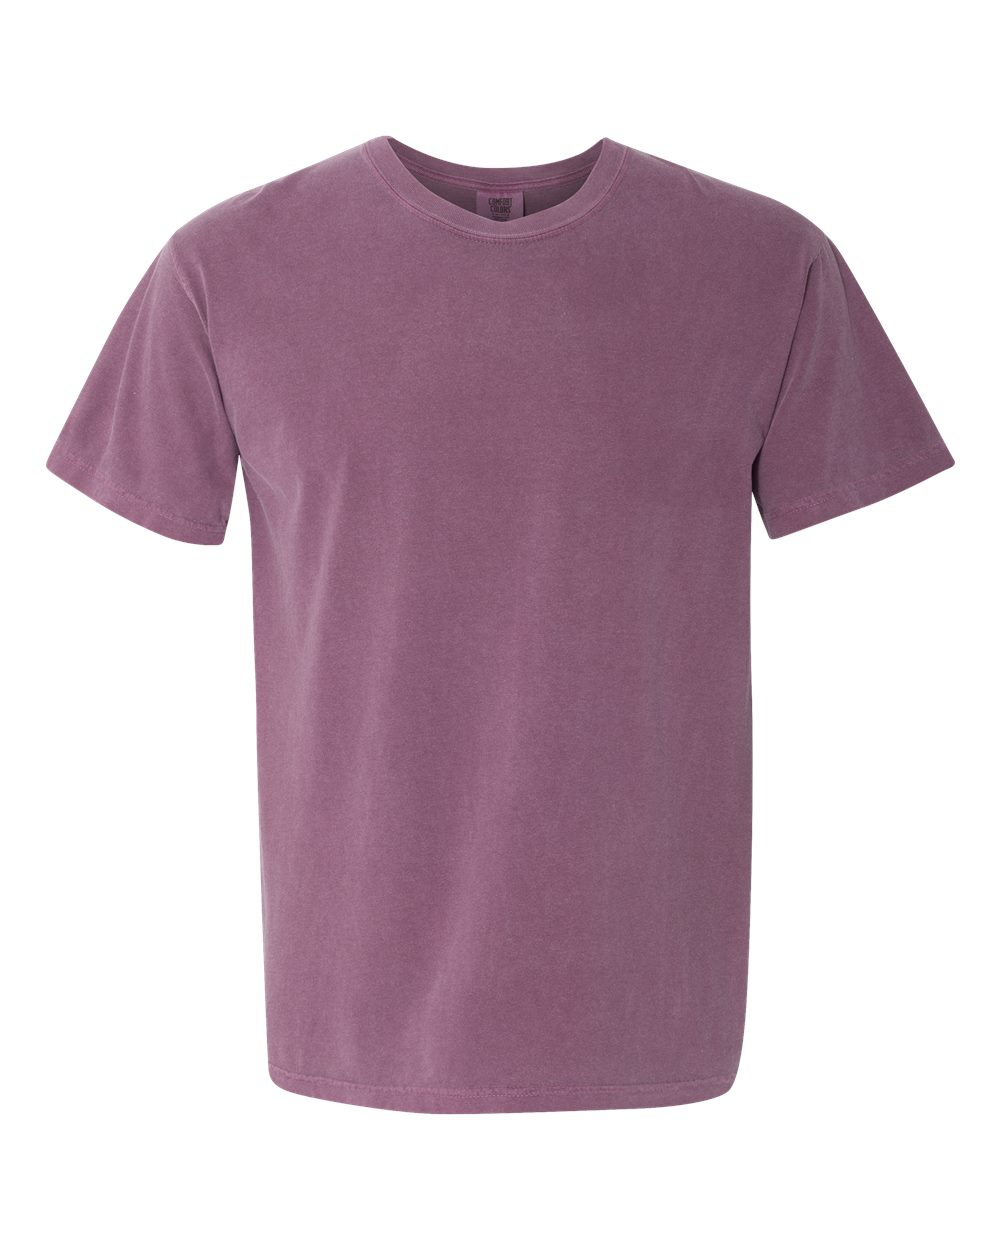 Comfort Colors Garment-Dyed Tee (1717) in Berry